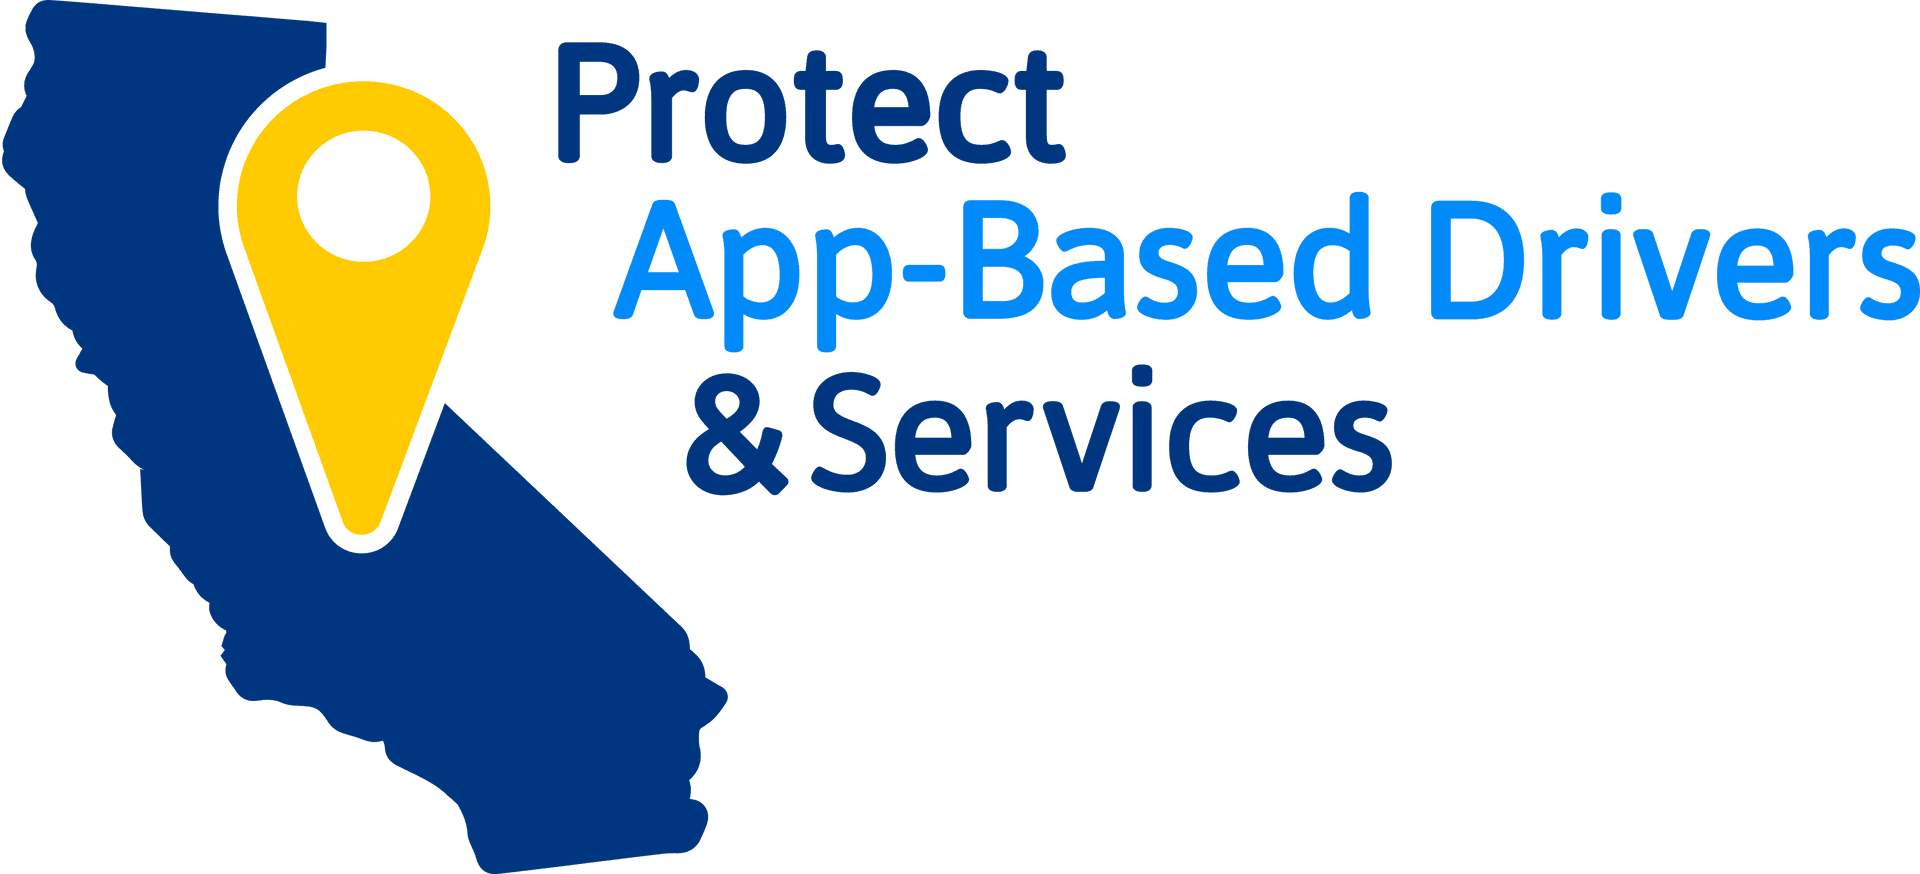 App Based Driver Protection Campaign Logo PNG